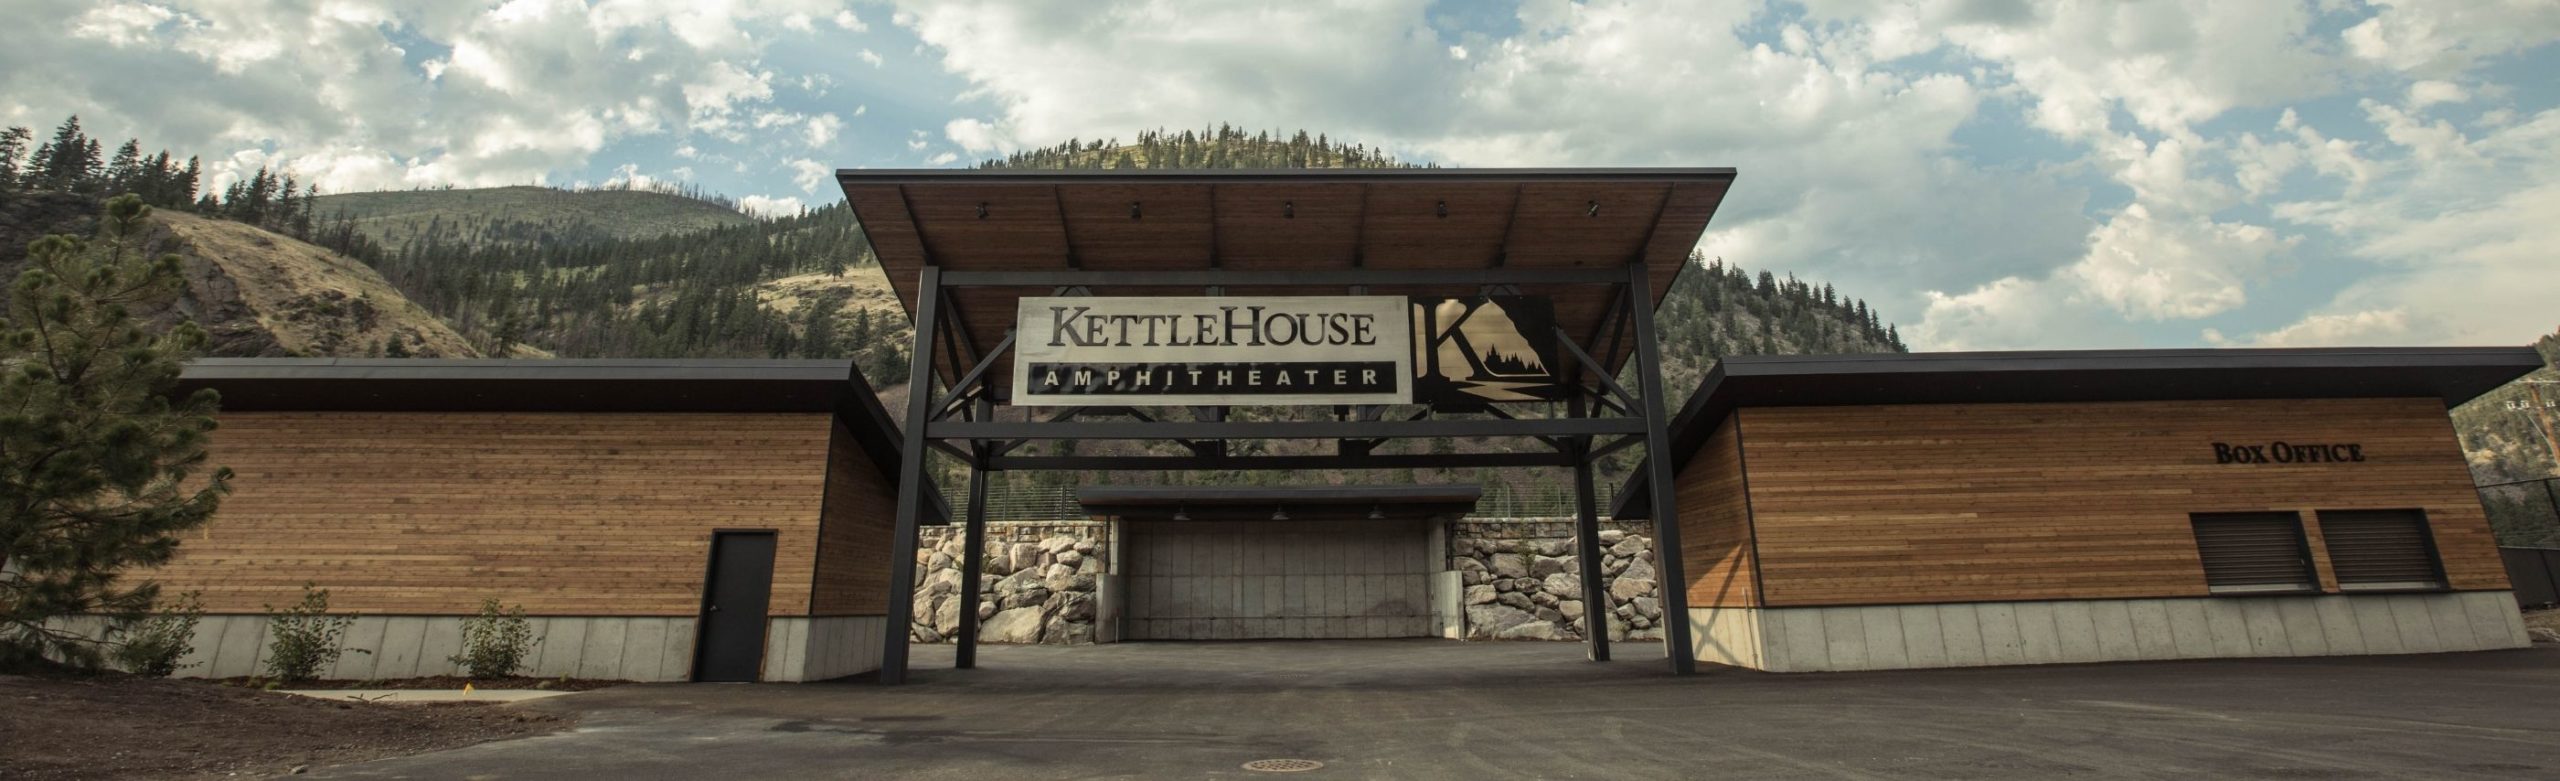 Call for Parking Volunteers at KettleHouse Amphitheater Image